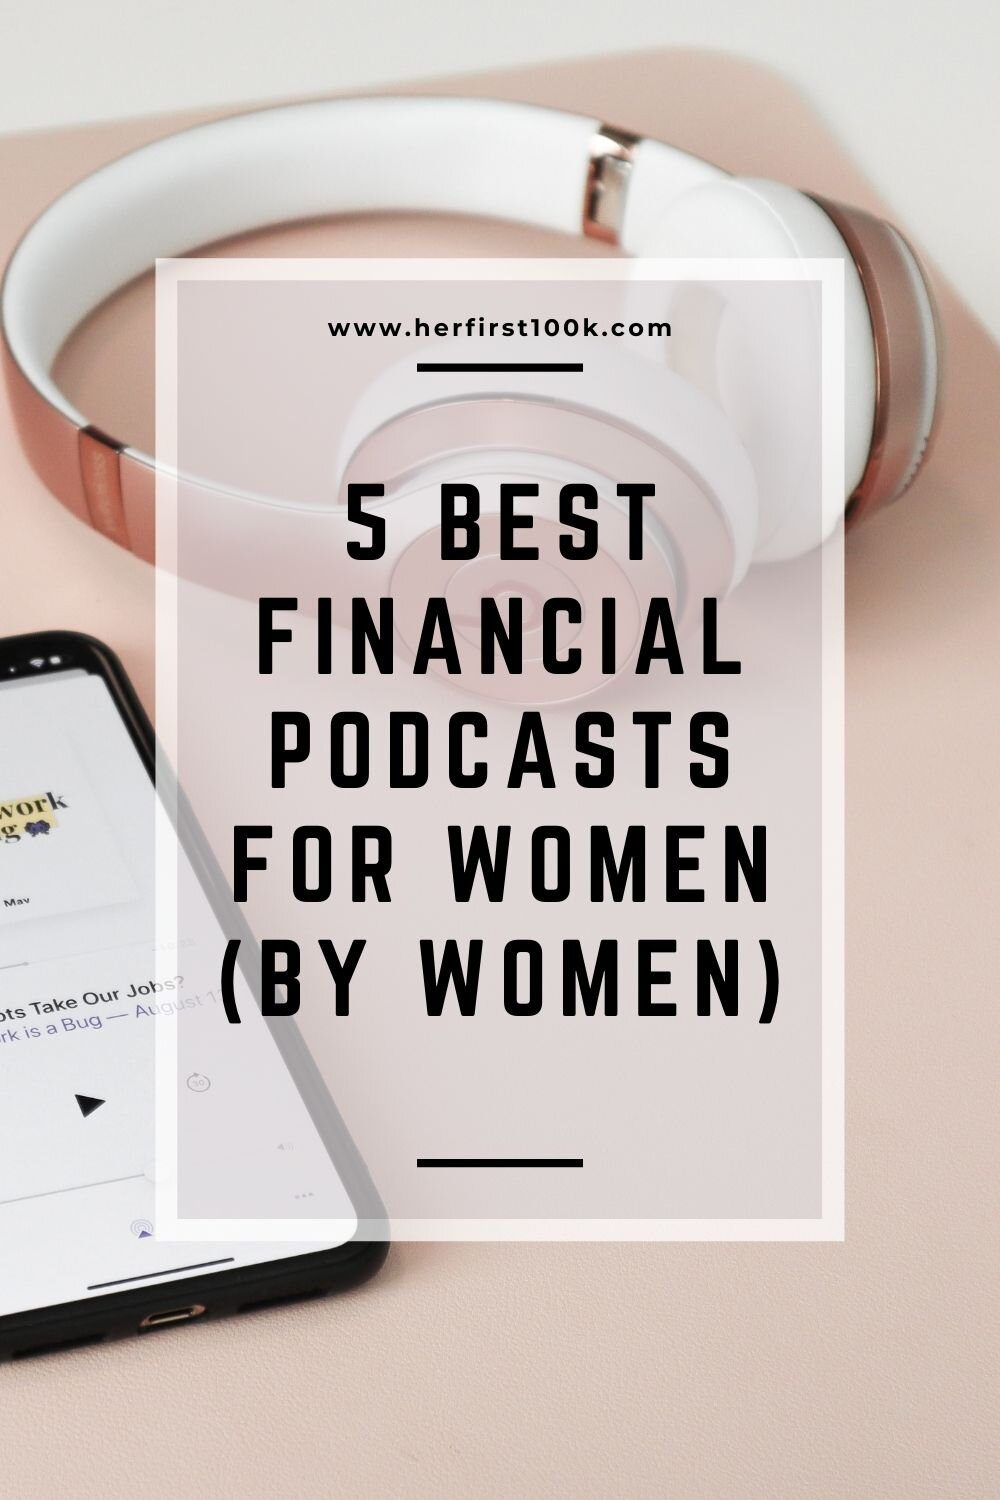 5-best-financial-podcasts-for-women.jpg